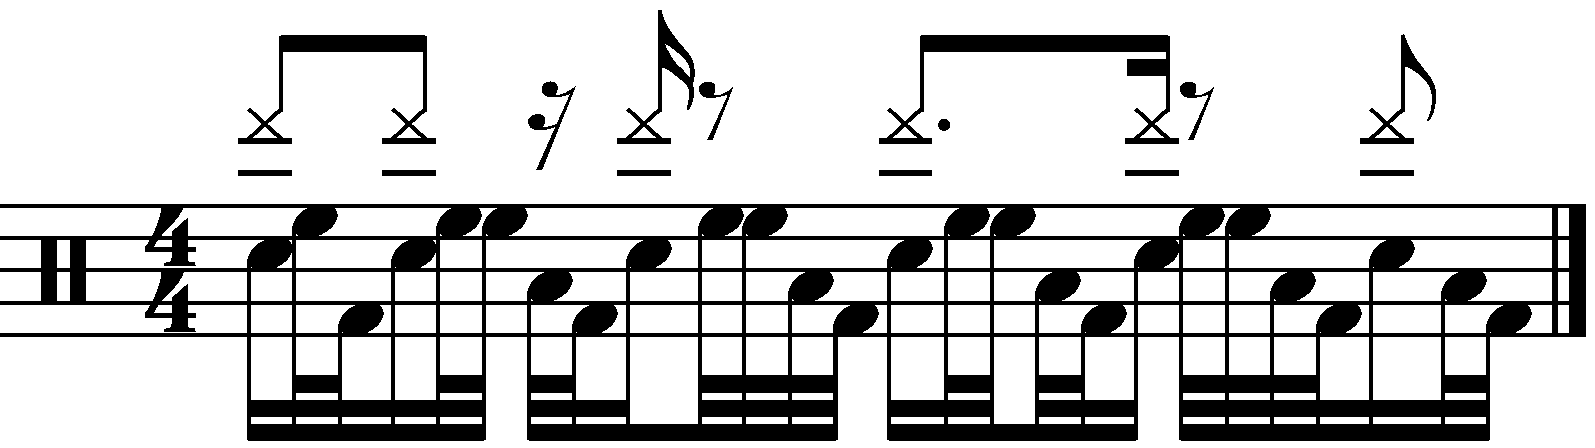 Syncopated 16th note 233332 fills